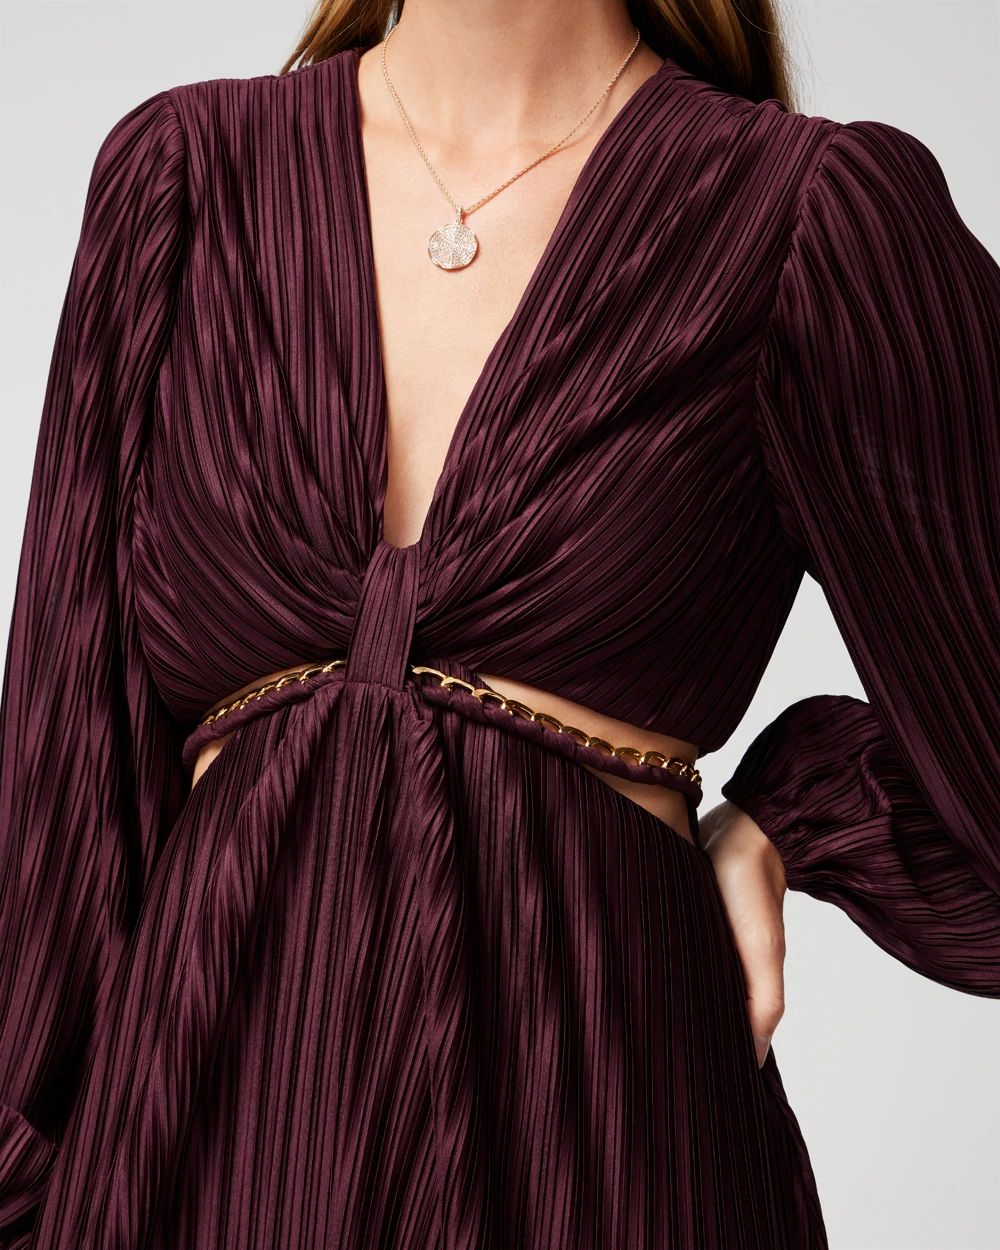 Long Sleeve Chain Cutout Maxi Dress click to view larger image.